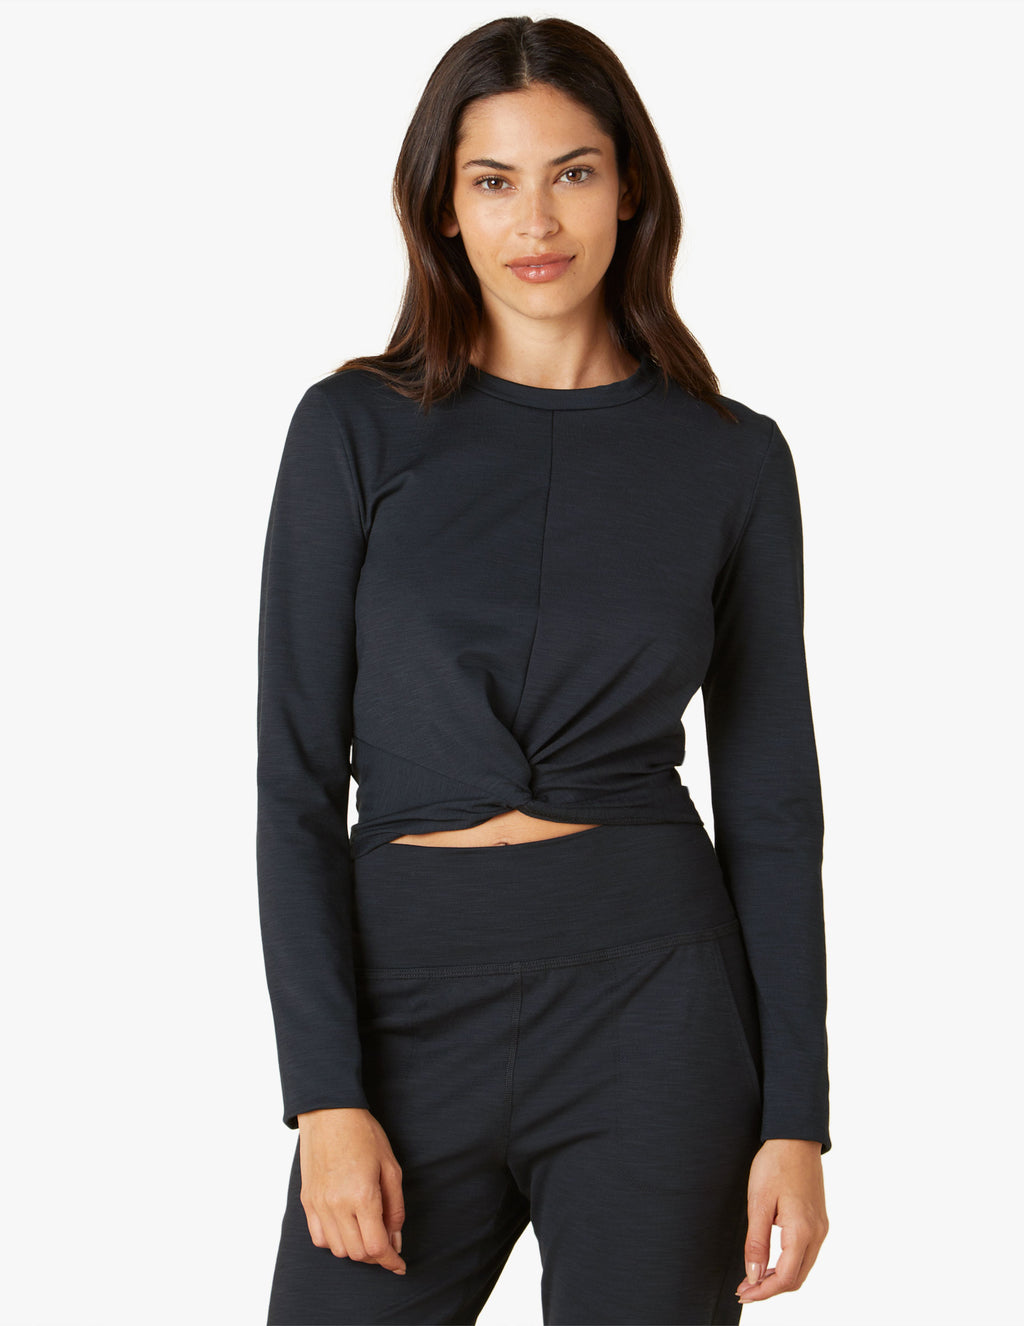 Heather Rib Groove Cropped Top Featured Image